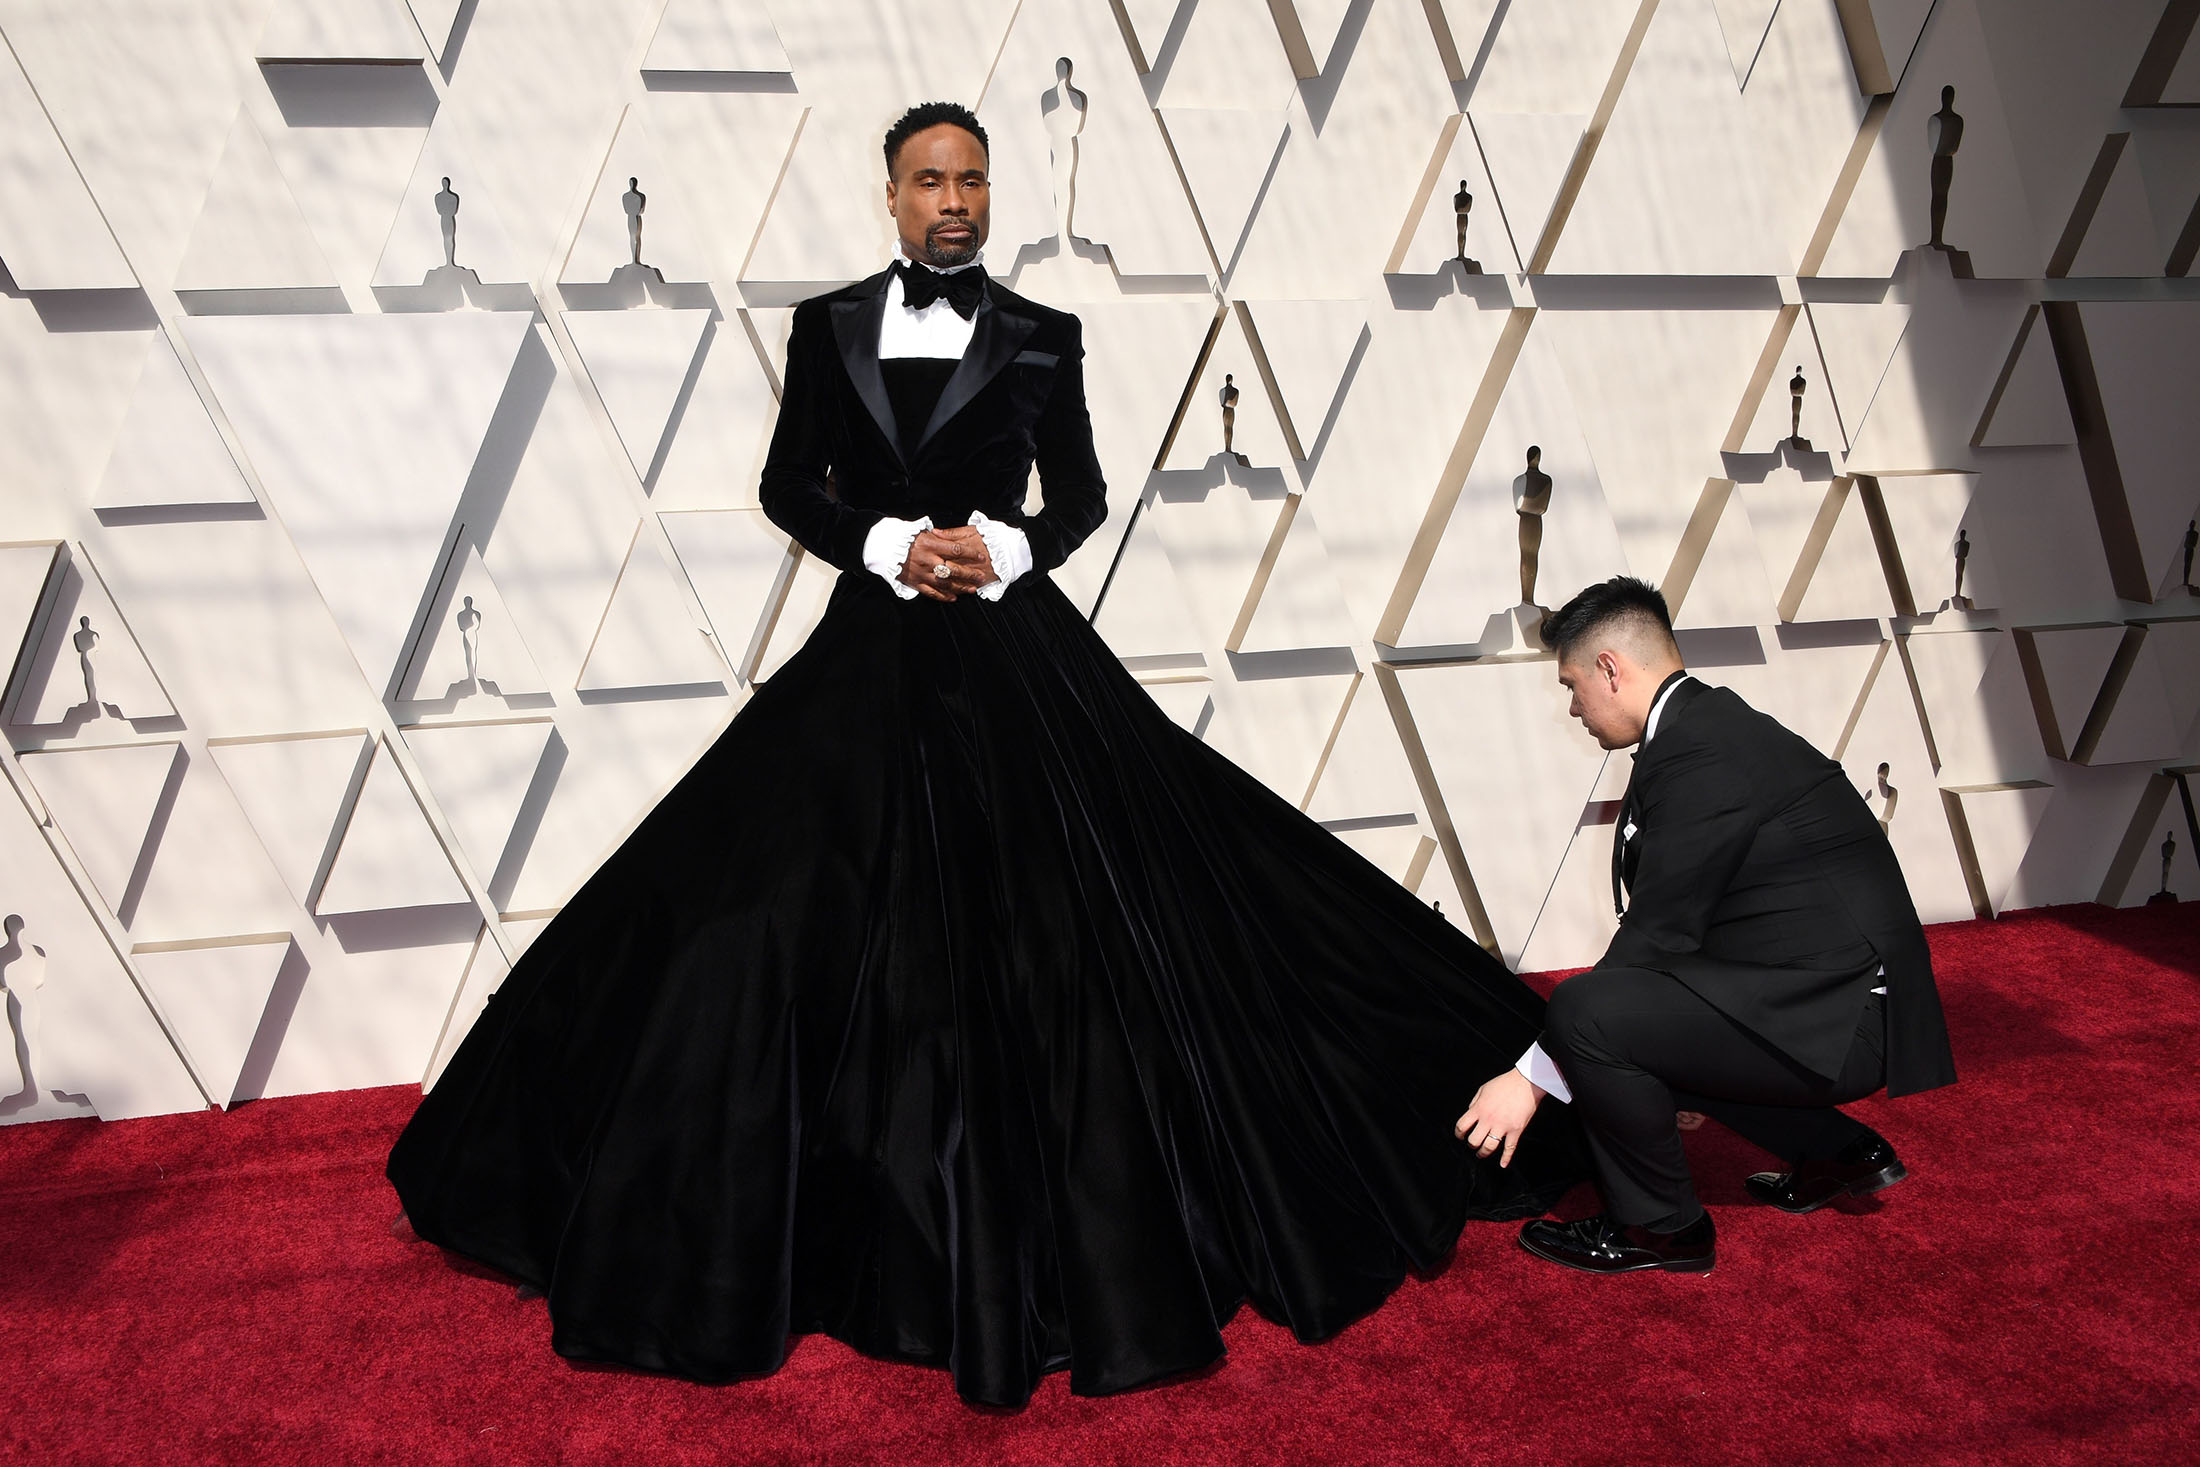 Oscars: The Most Expensive Fashion and Jewelry on the Red Carpet